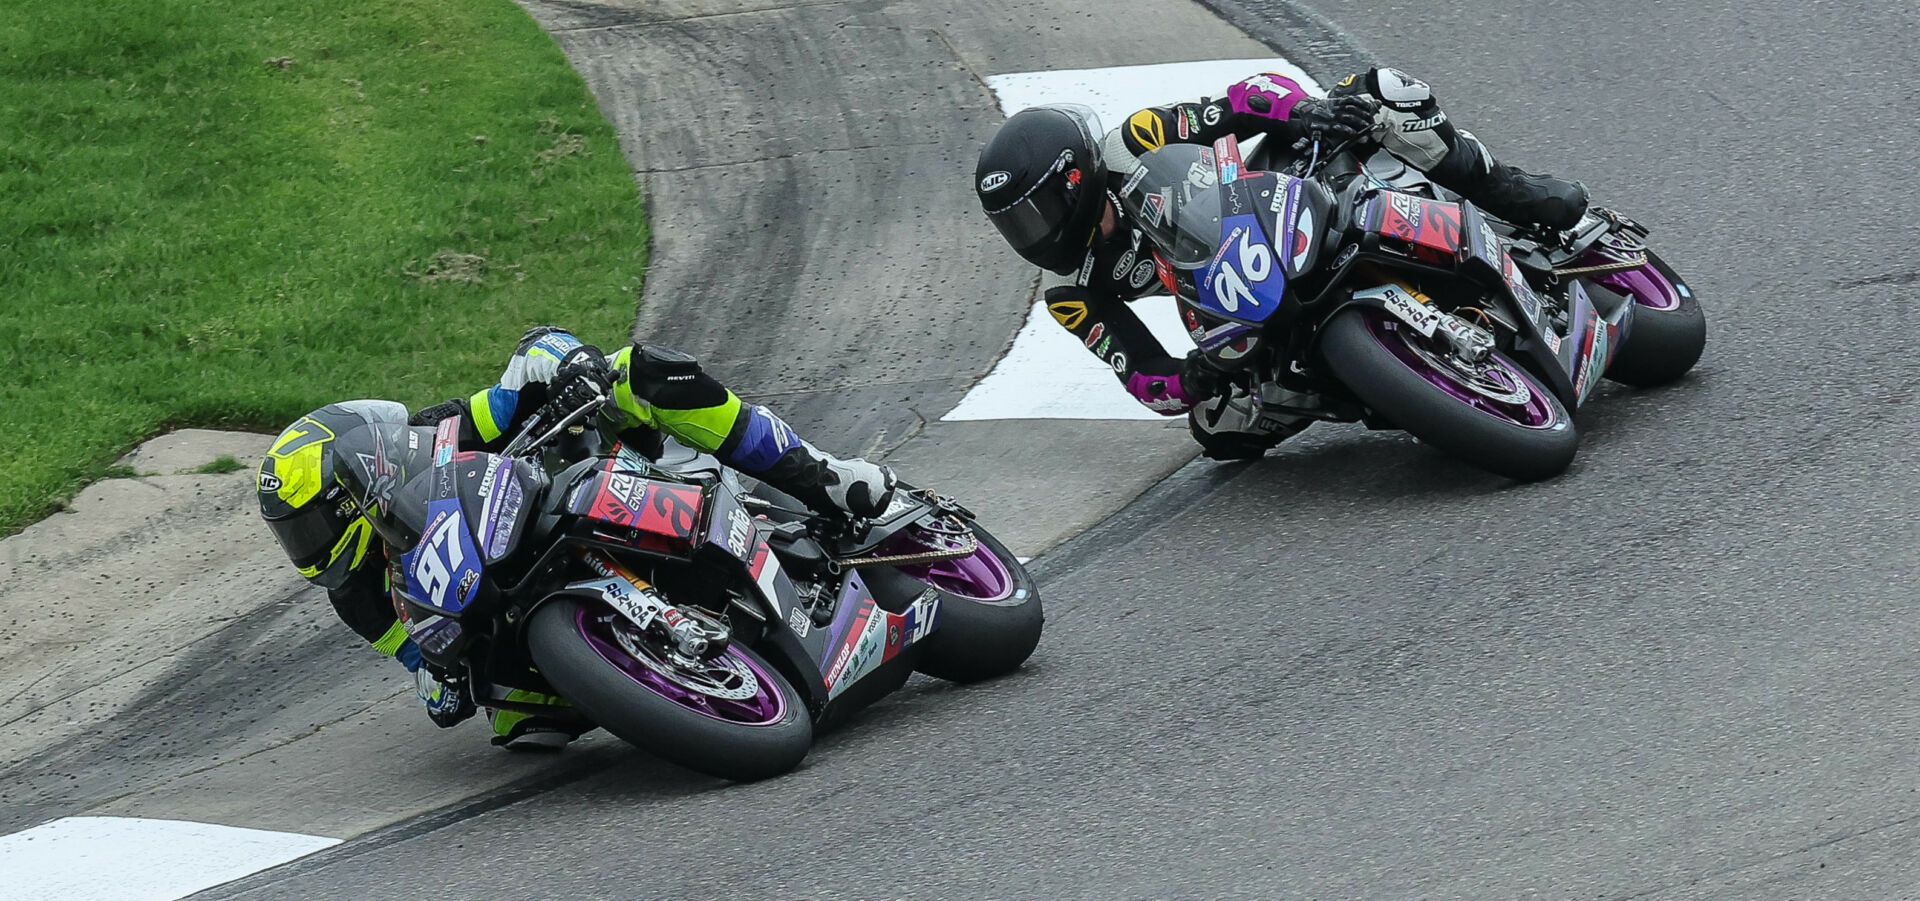 Rocco Landers (97) and Gus Rodio (96) on their Aprilia RS 660s at Barber Motorsports Park. Photo by Brian J. Nelson.